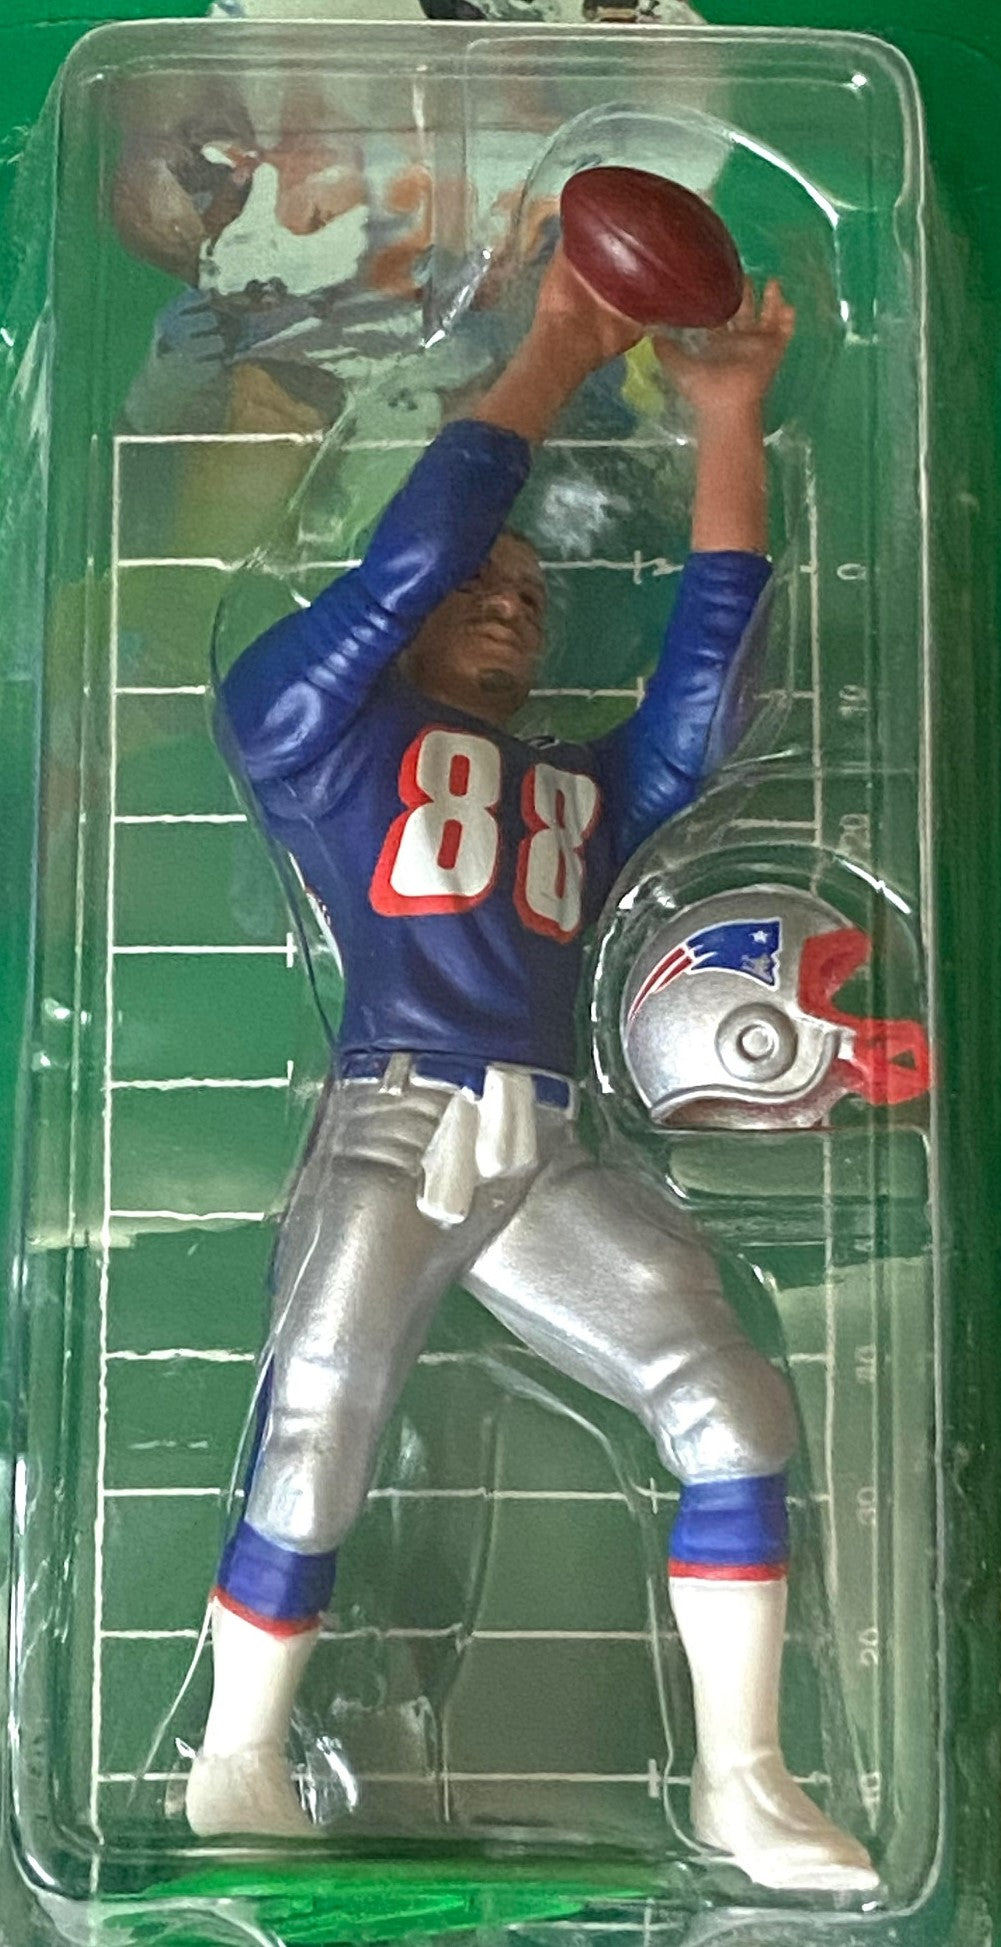 Terry Glenn 1998 NFL New England Patriots Starting Lineup Figurine NOS by Kenner